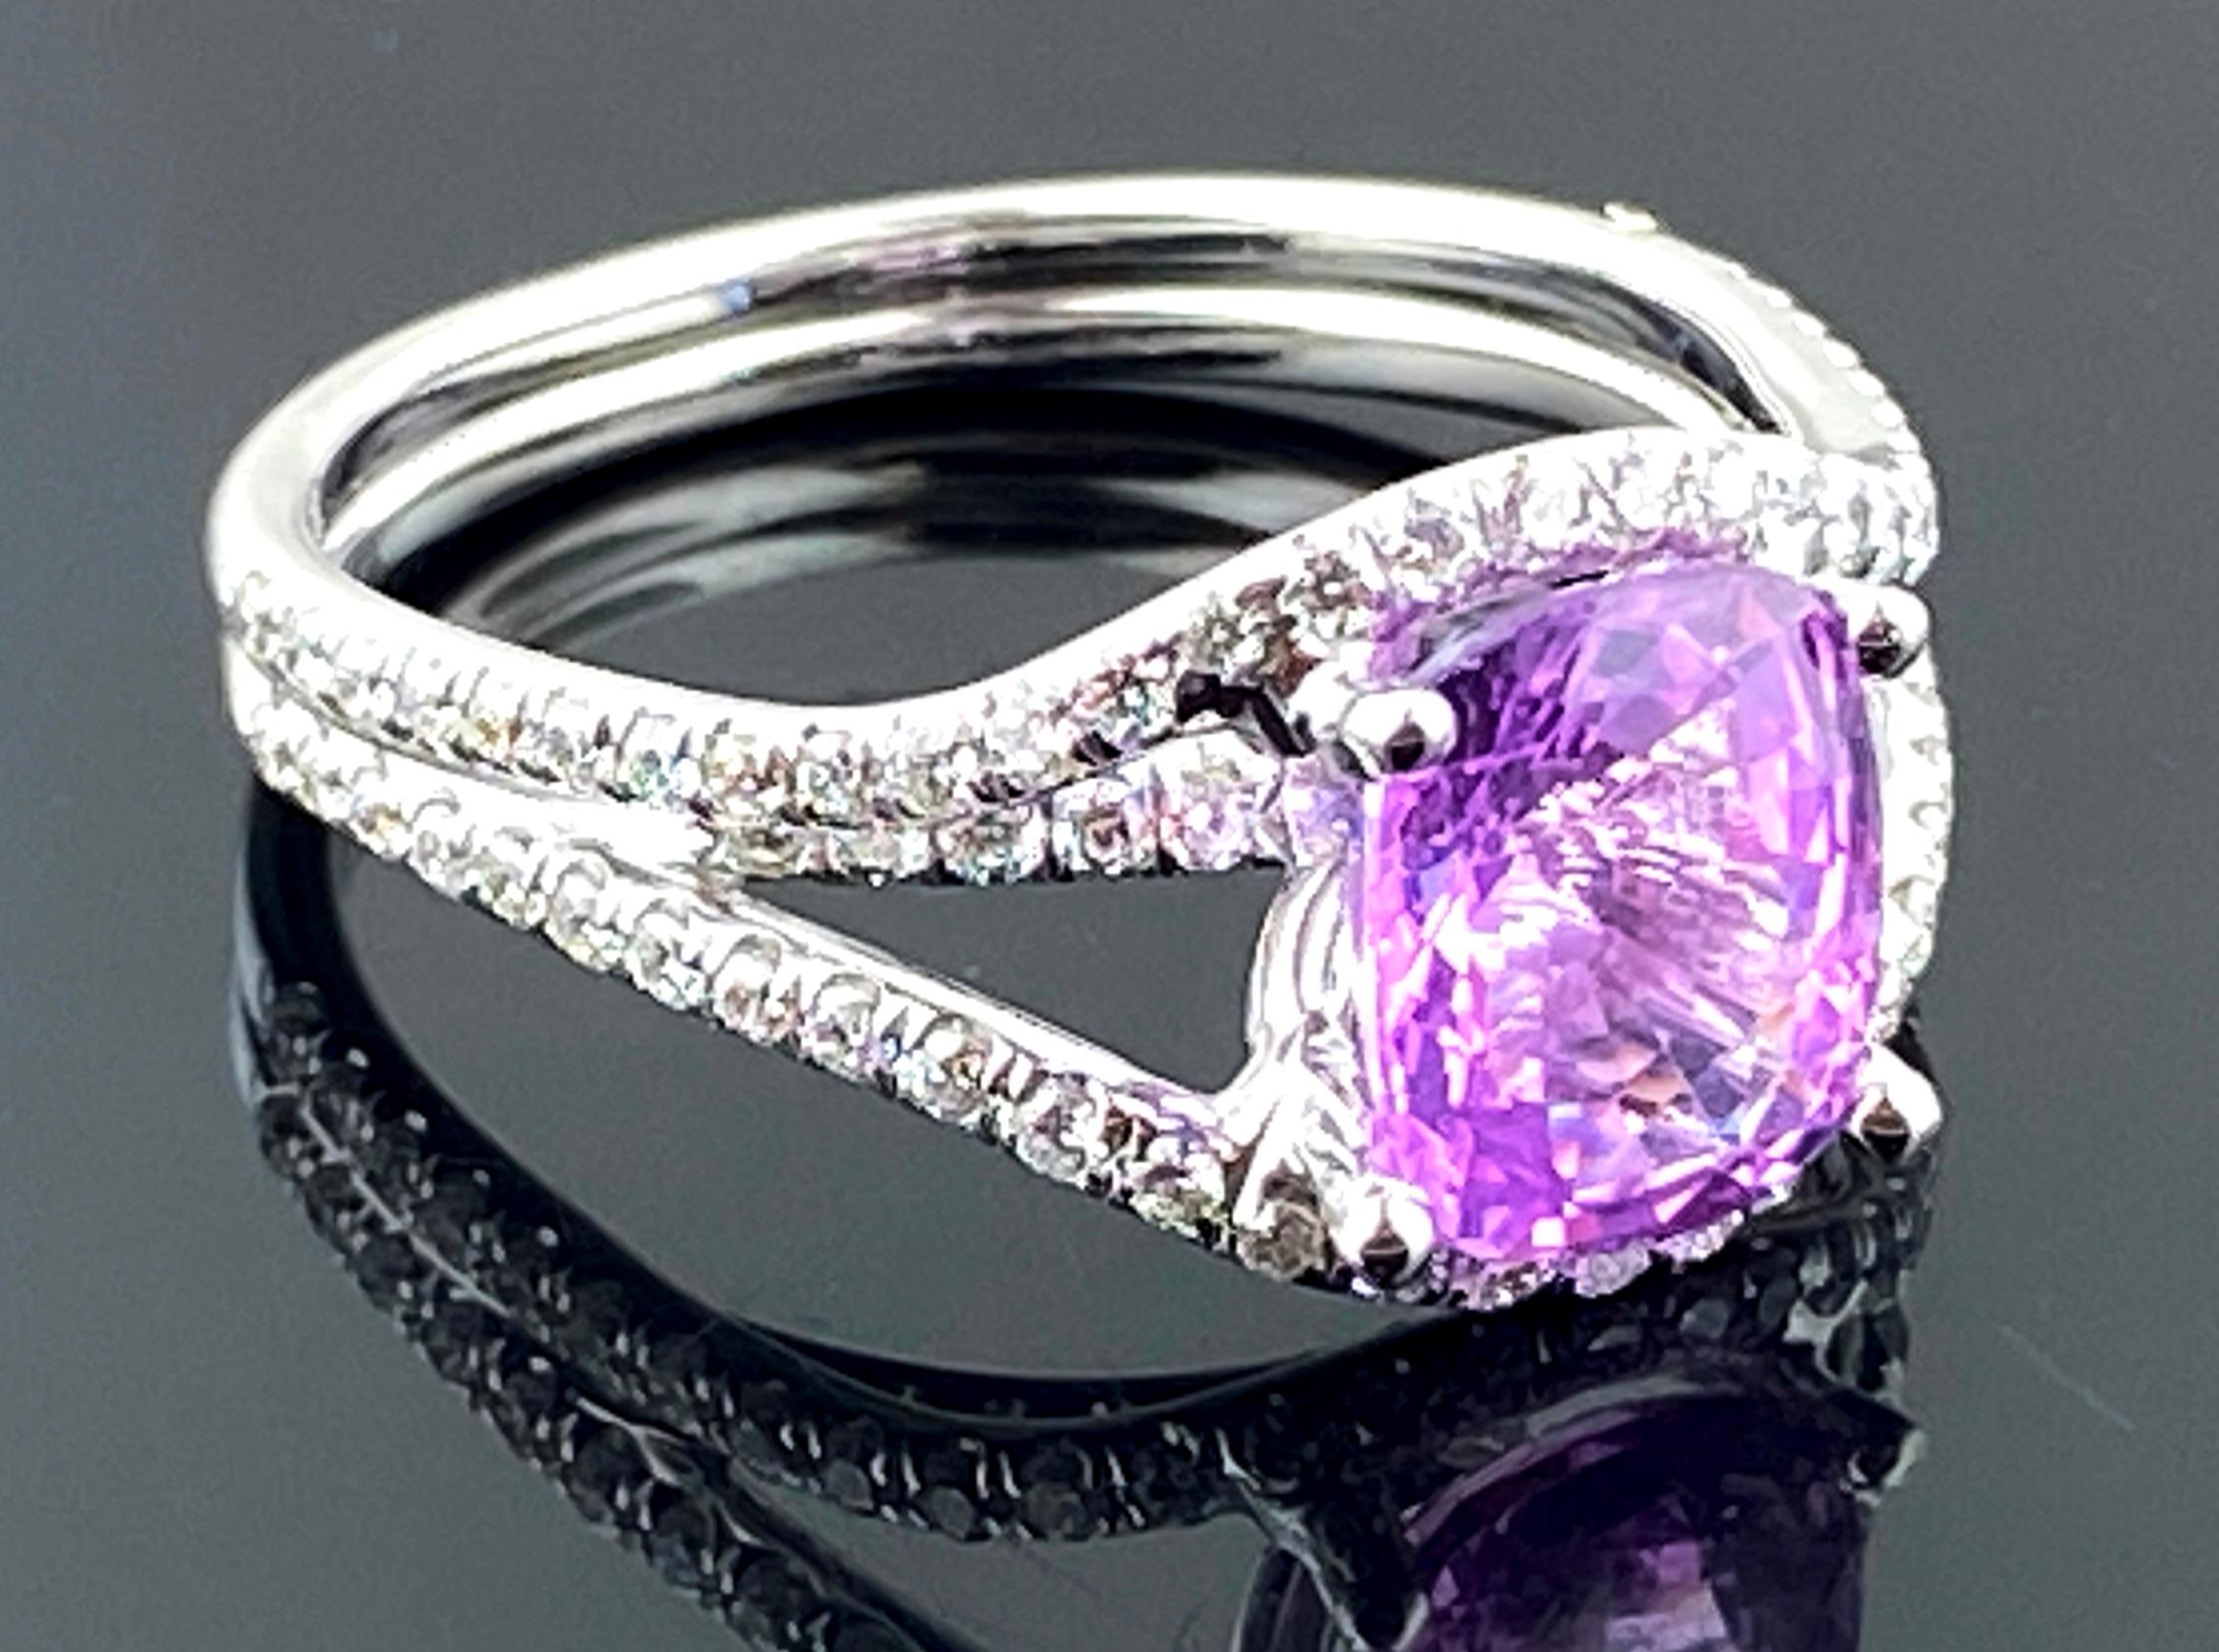 18 KT White Gold 2.37 Carat Oval Cut Pink Sapphire and Diamond Ring 3